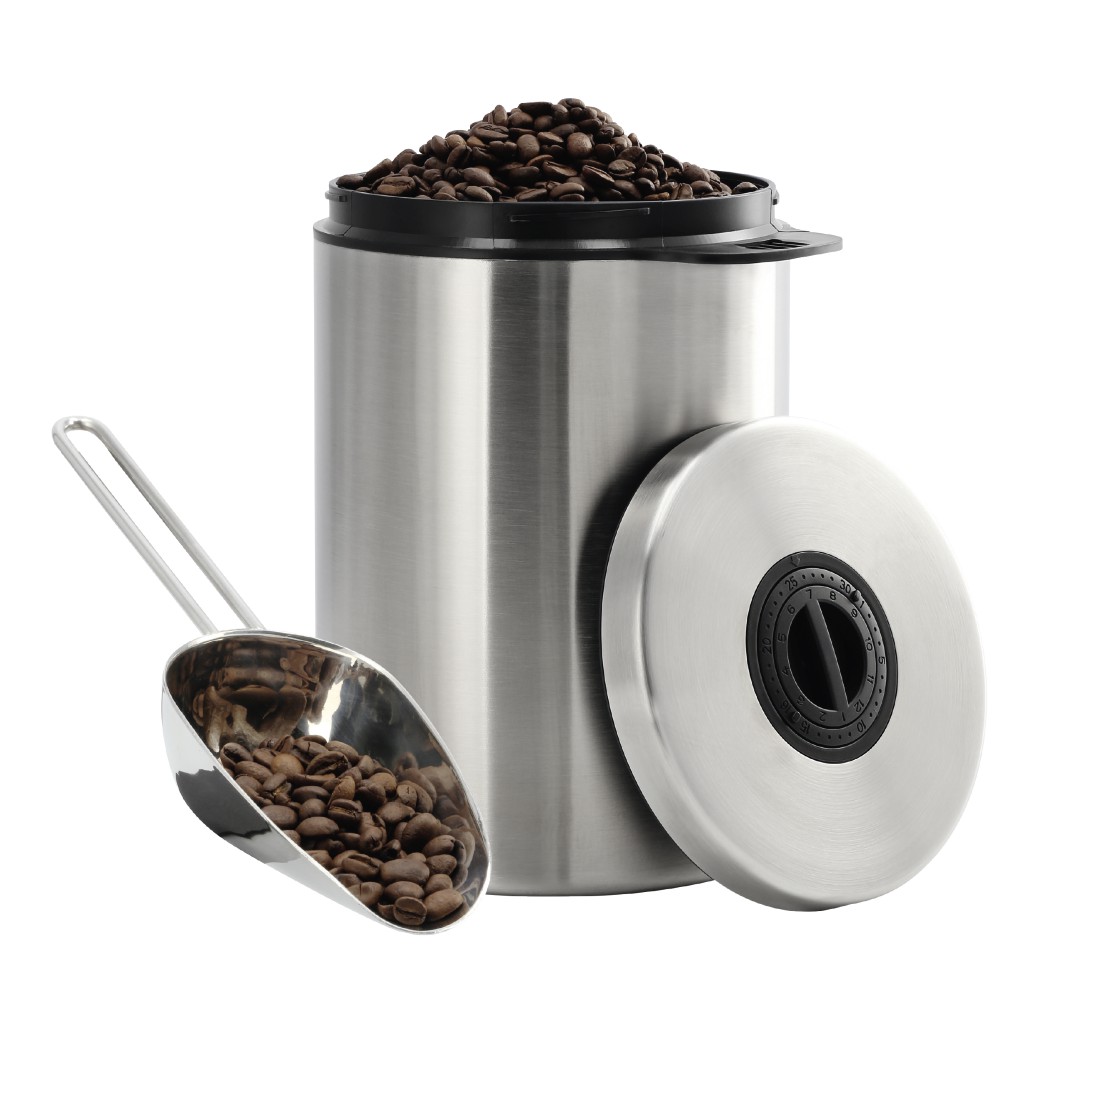 abx High-Res Image - Xavax, Stainless Steel Tin for 1 kg of Coffee Beans, with Scoop